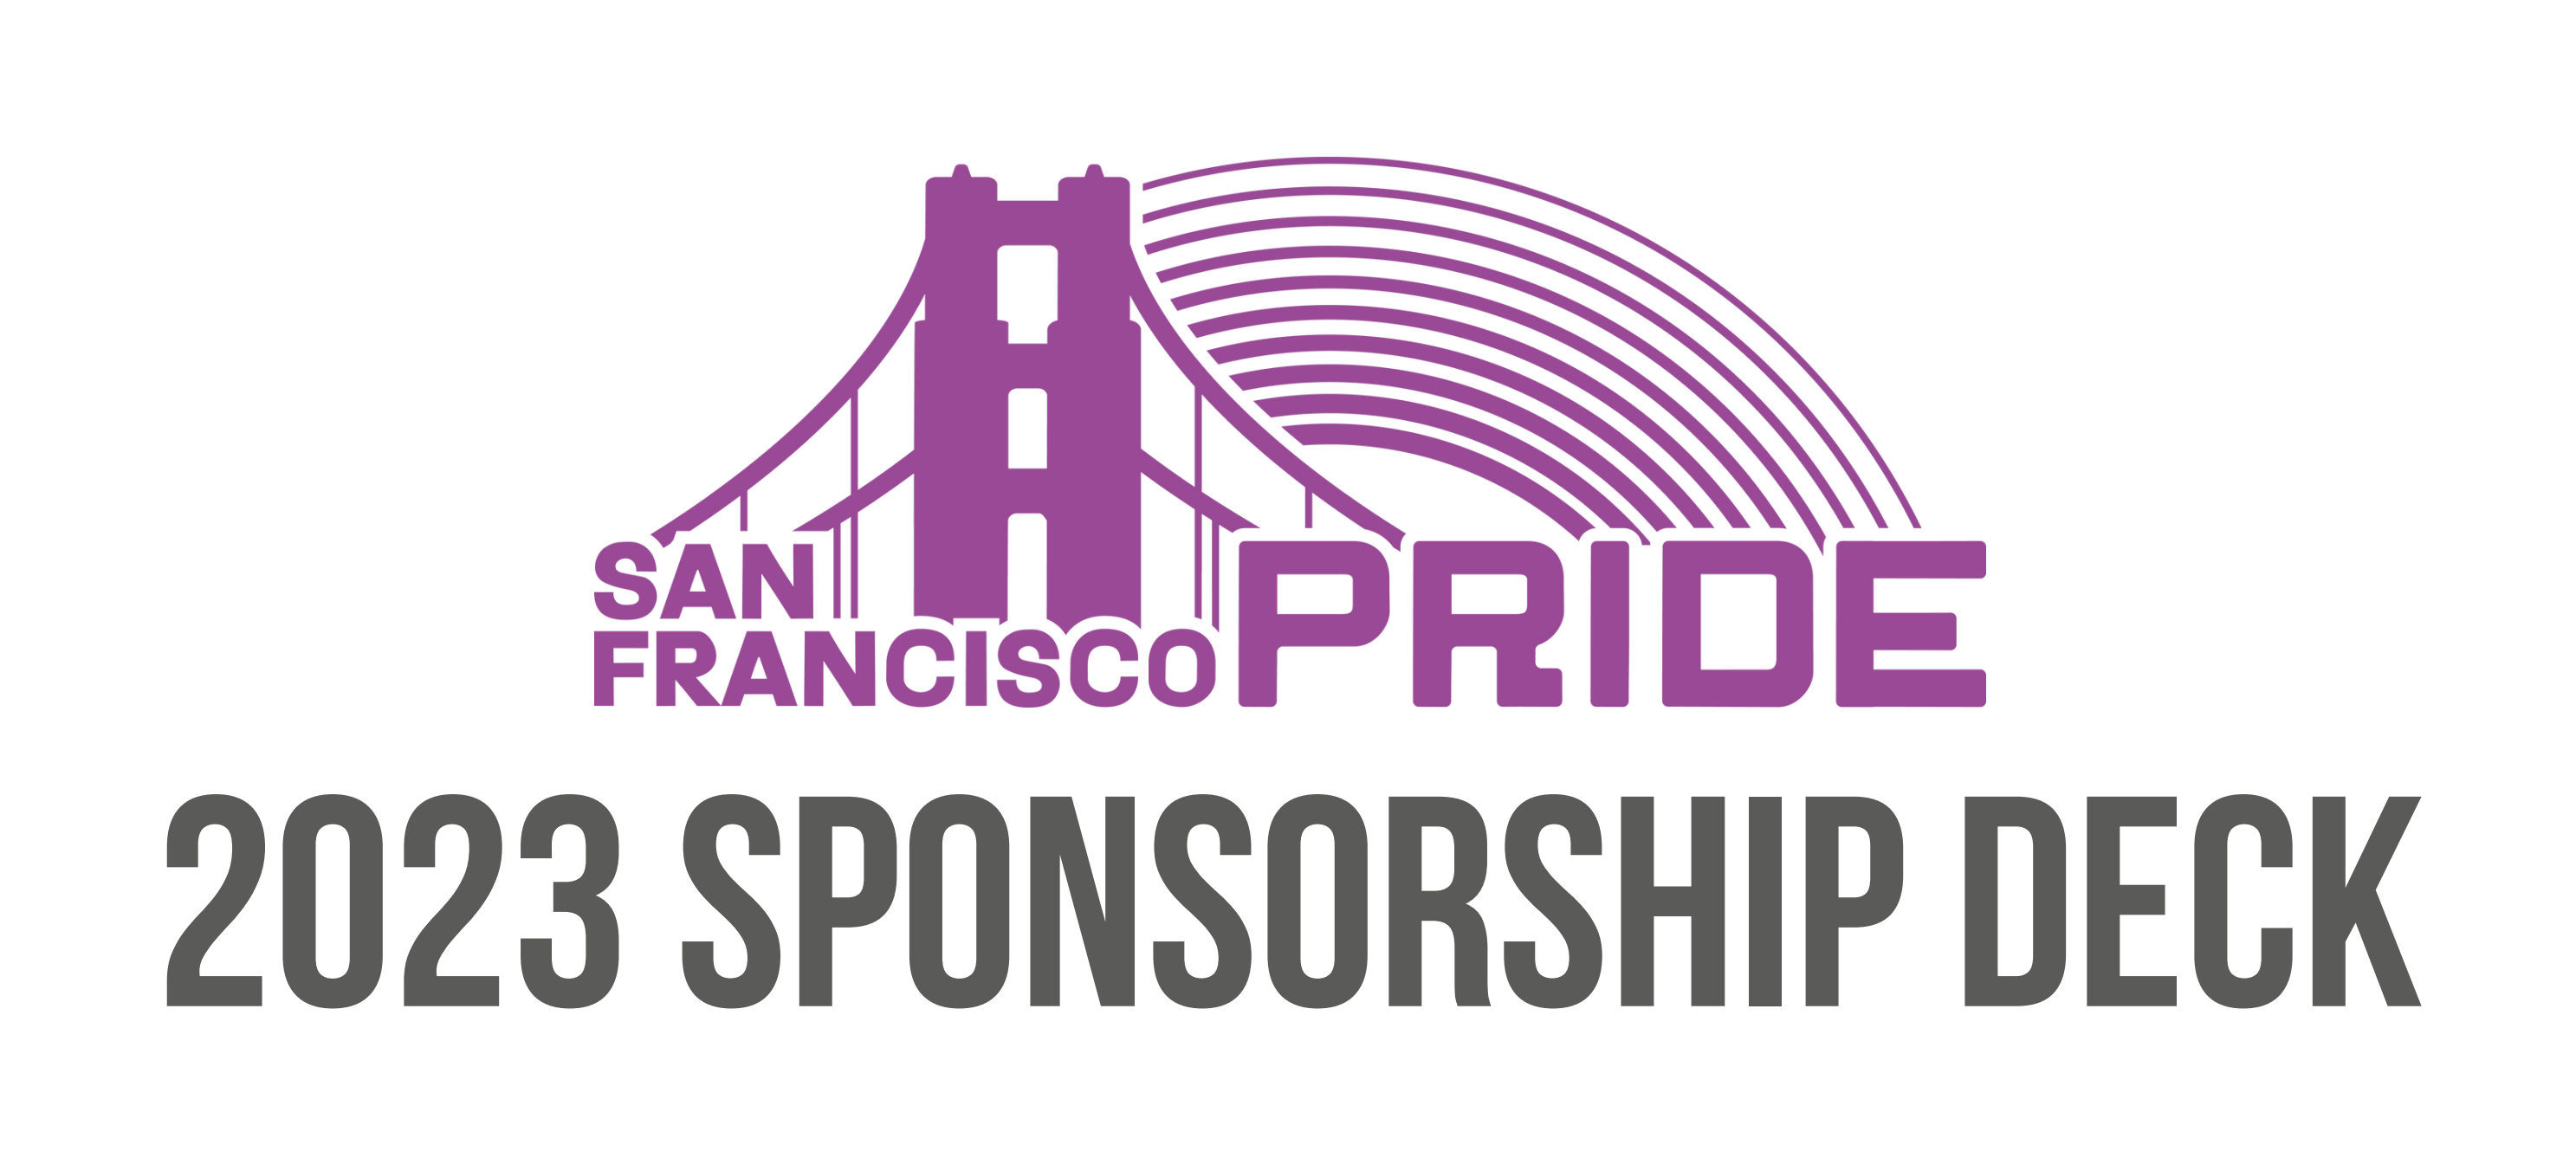 San Francisco LGBT Pride Partnership Opportunities for 2023